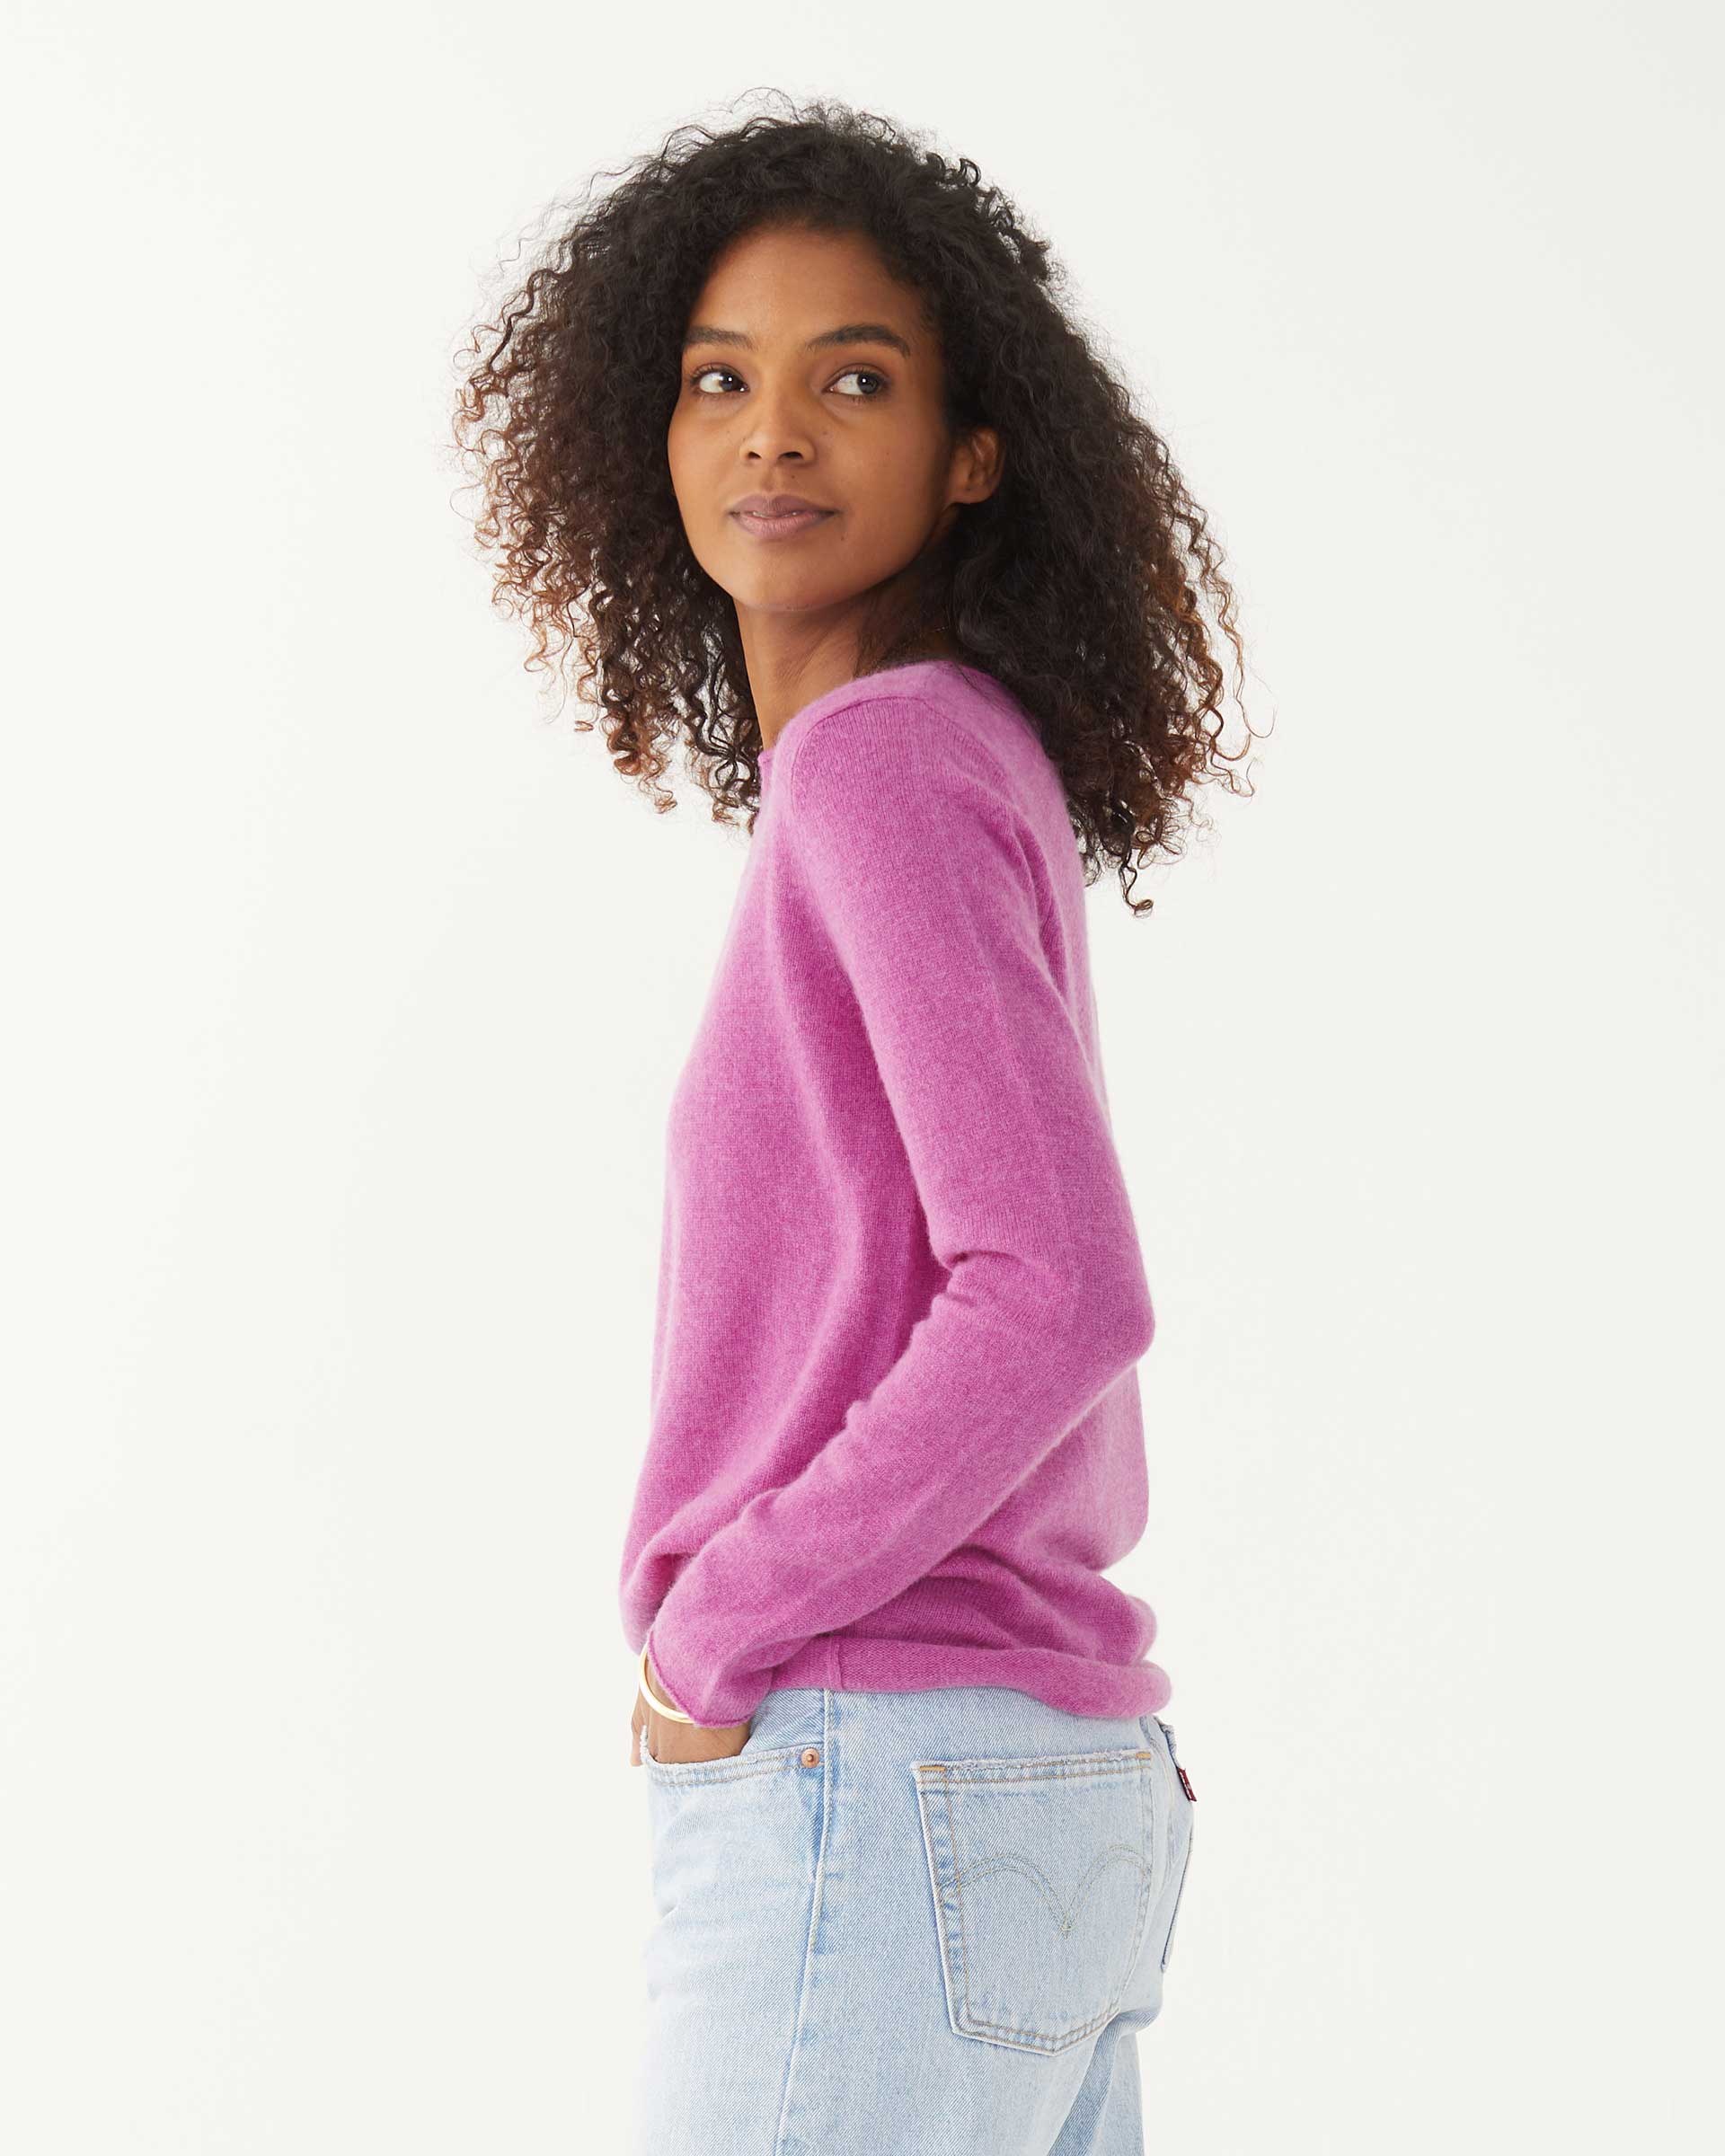 female wearing purple fitted cashmere sweater with a crewneck sideways on a white background